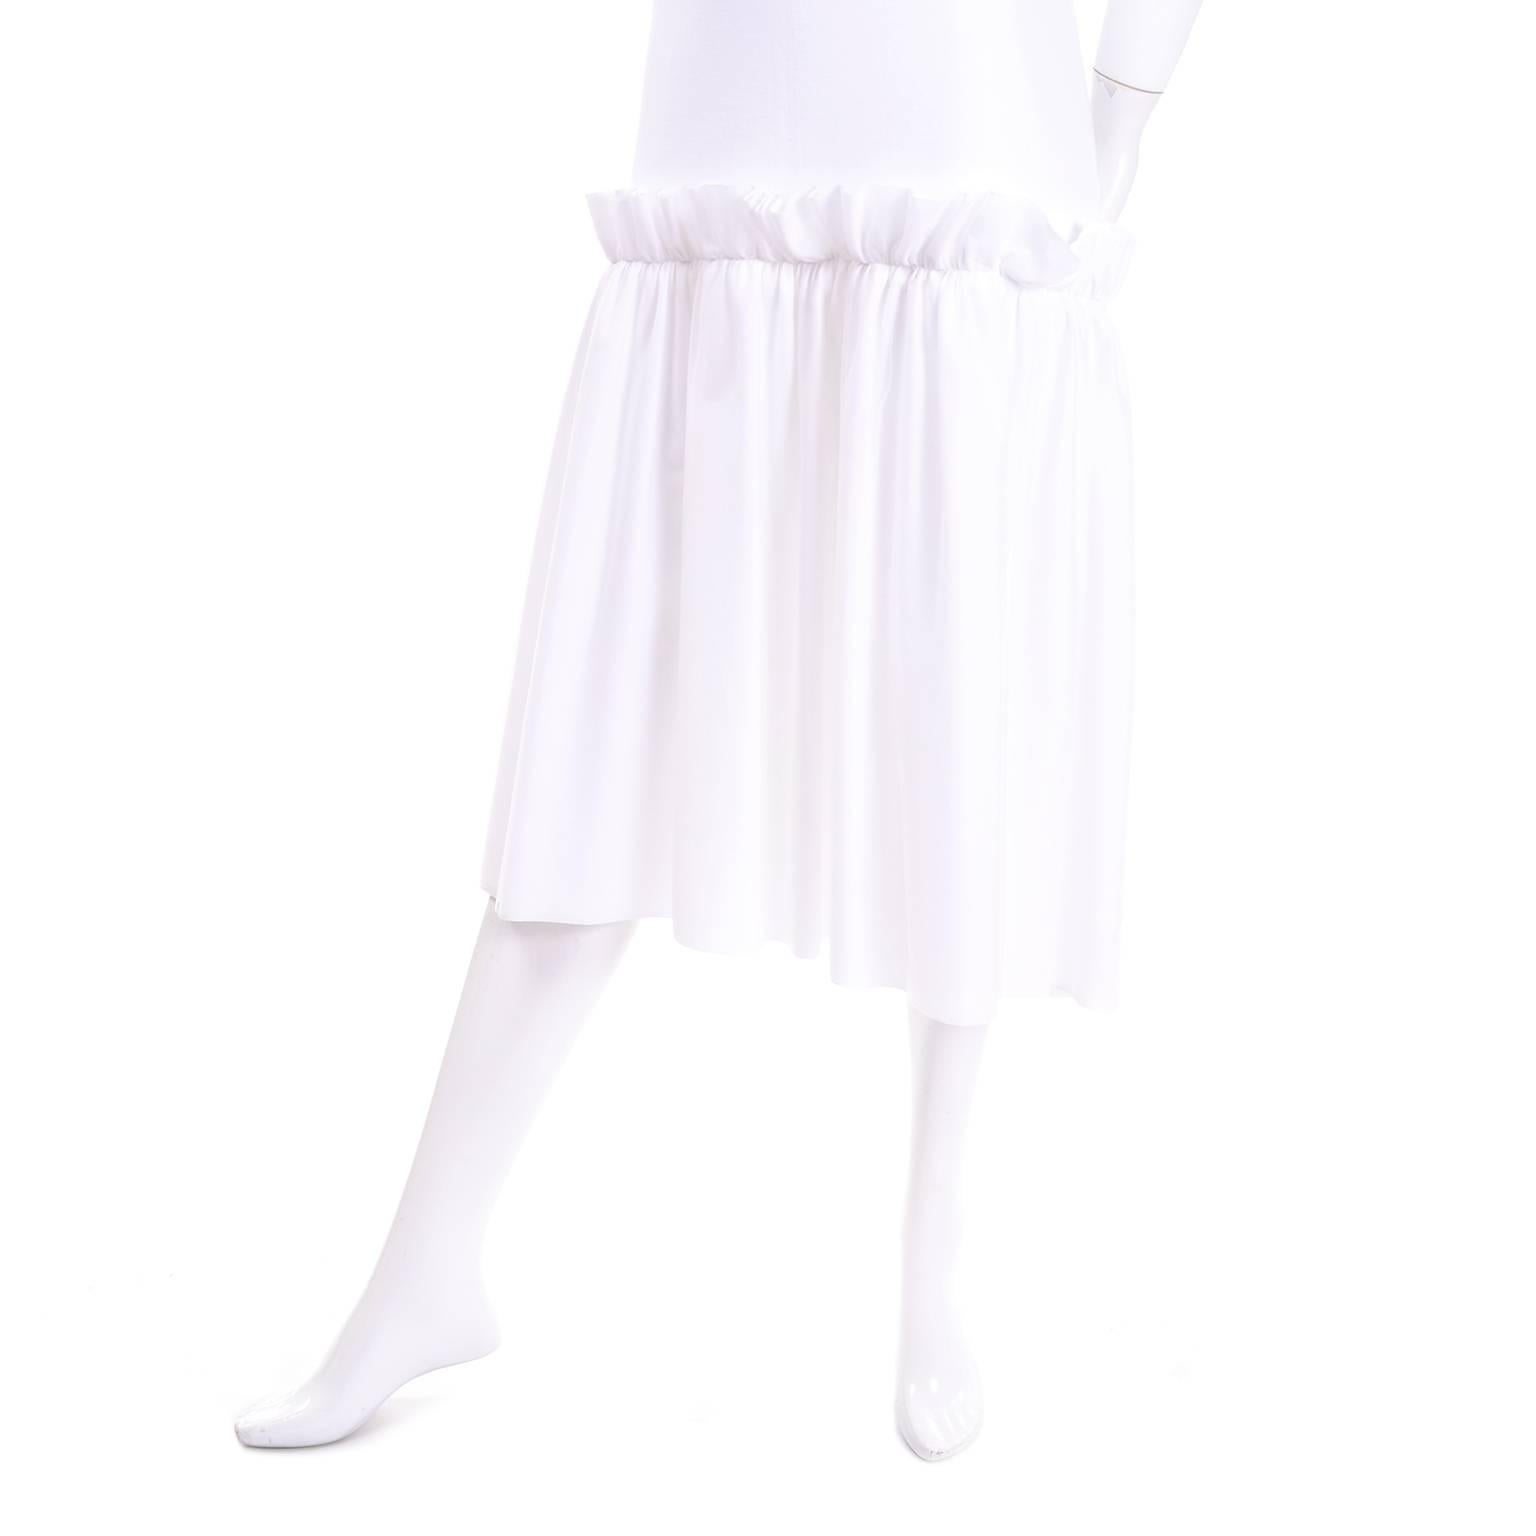 This is a great white cotton minimalist Simone Rocha t-shirt dress with a fine layer of white tulle over the skirt. This dress has both the Simone Rocha and the Ikram Chicago store labels. The dress appears to be unworn and fits approximately a US